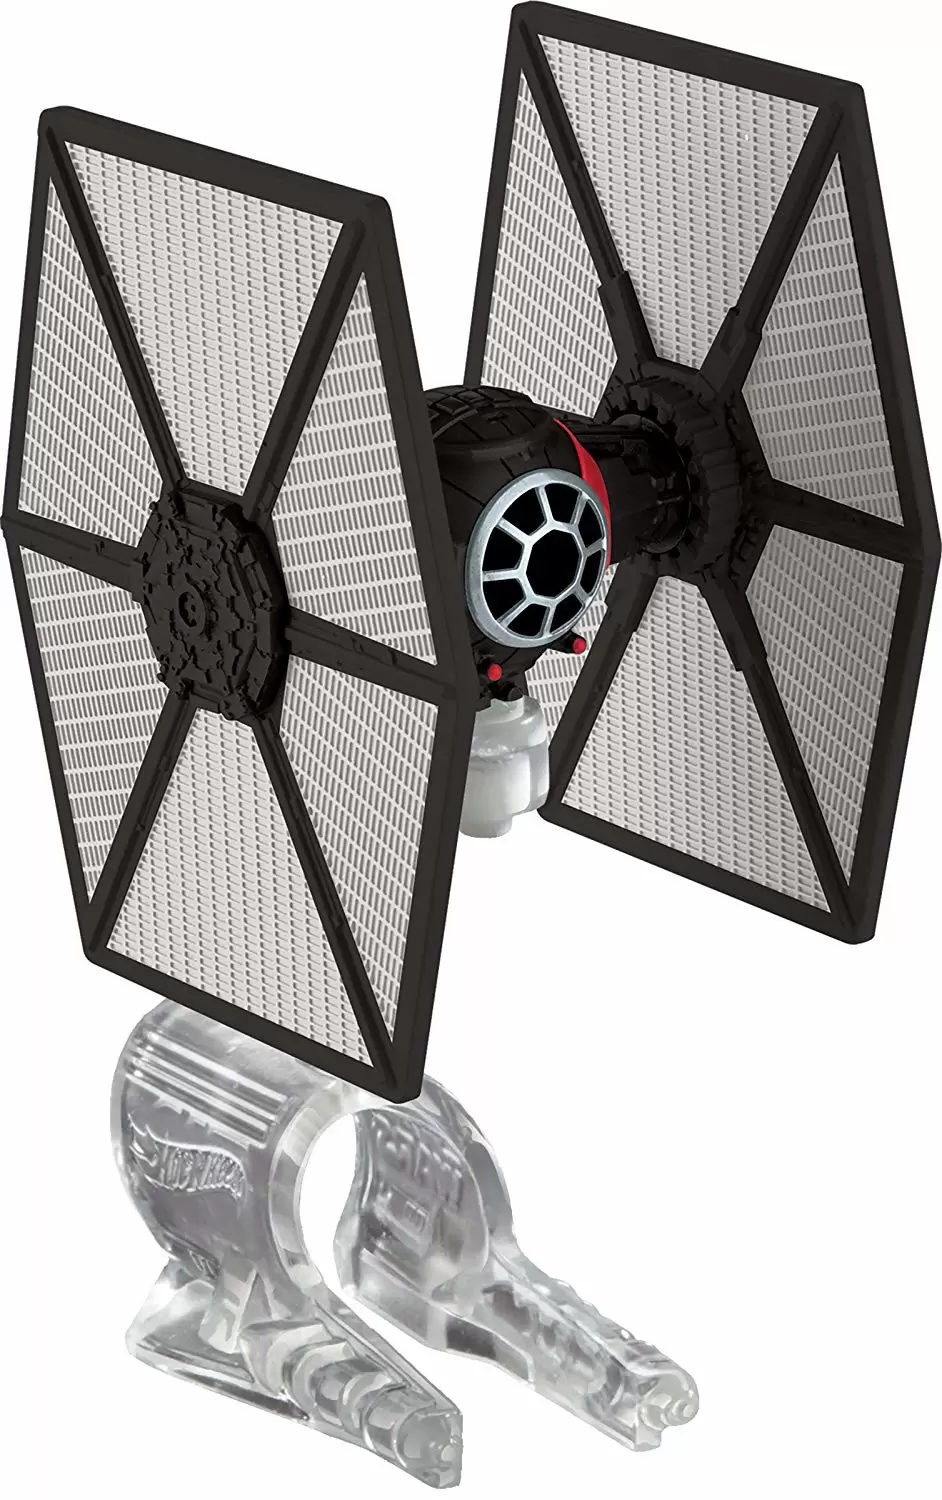 Die Cast Vehicle - Hot Wheels Star Wars - First Order Special Forces Tie Fighter